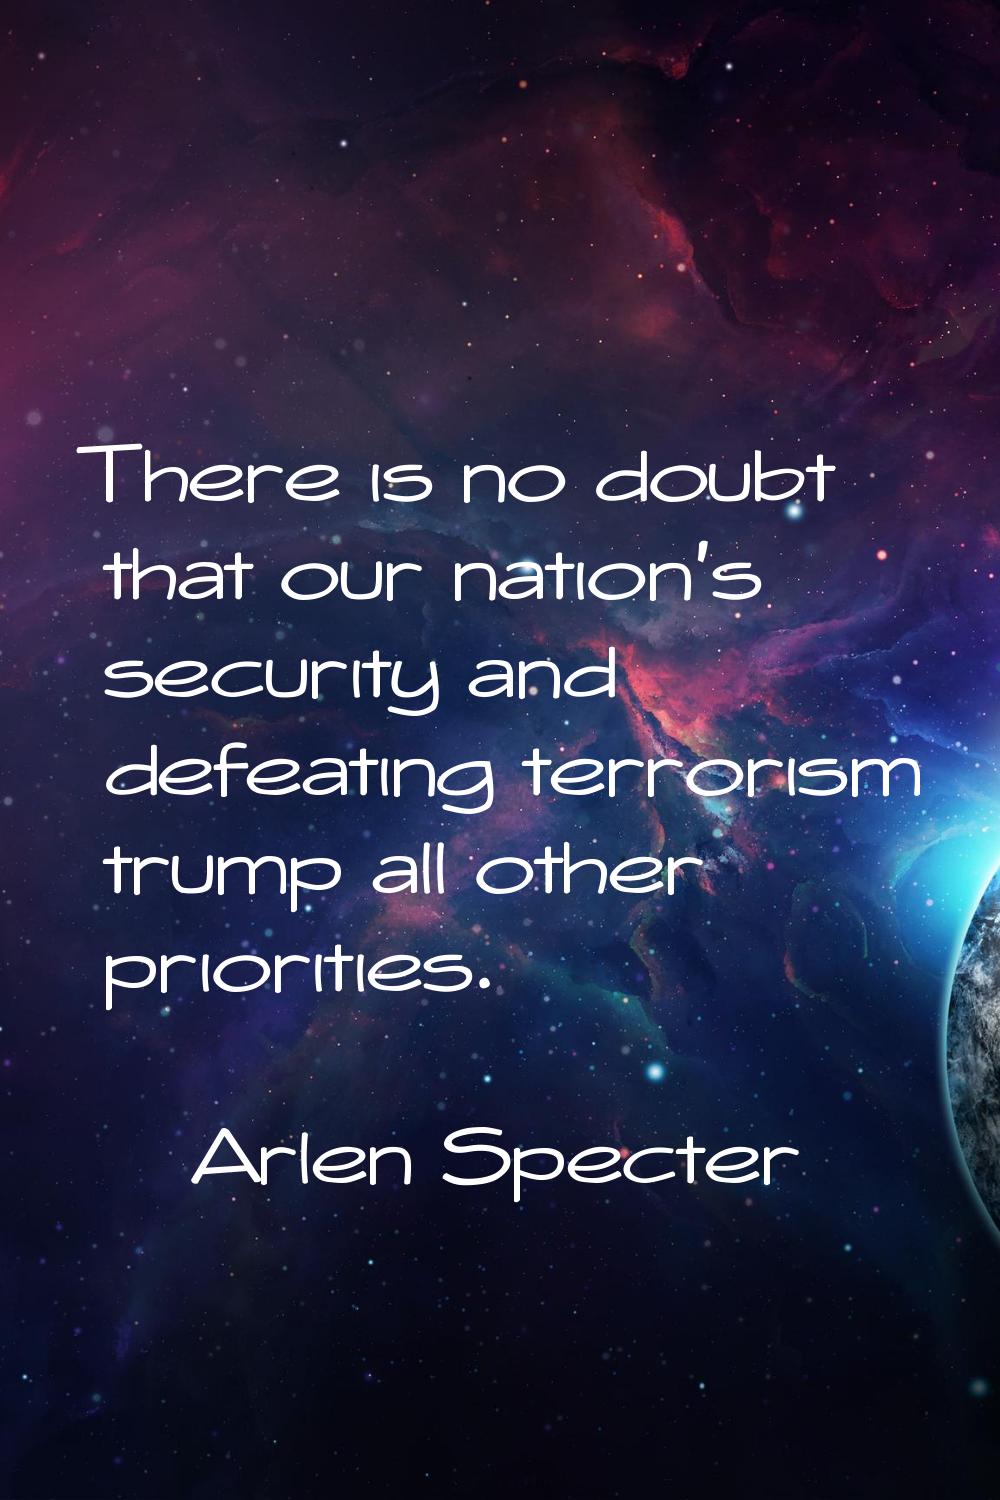 There is no doubt that our nation's security and defeating terrorism trump all other priorities.